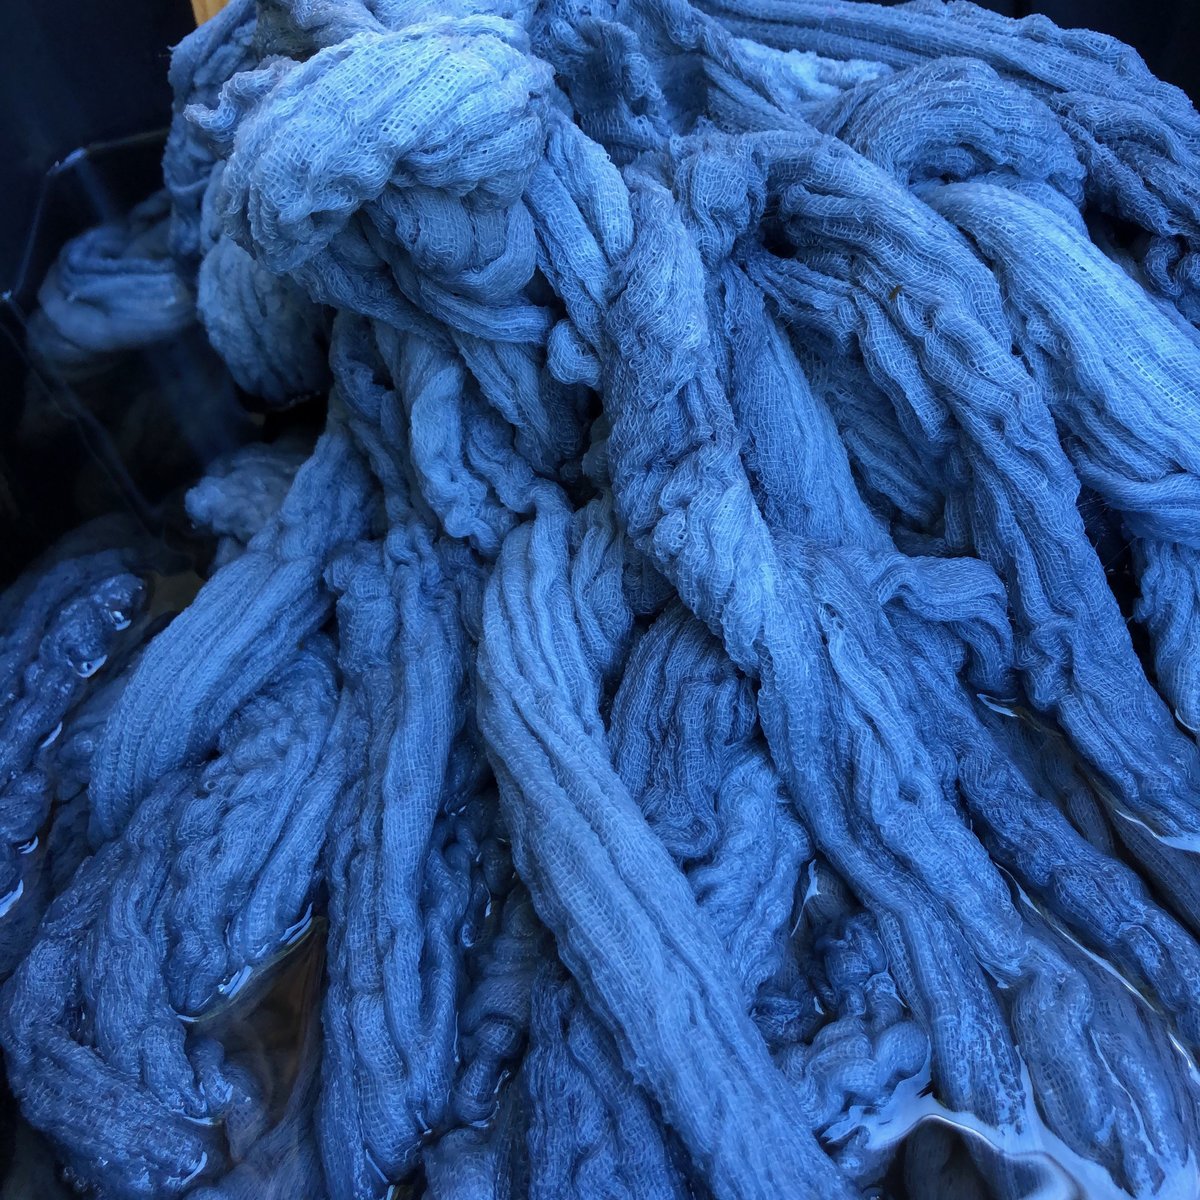 dyed cheesecloth